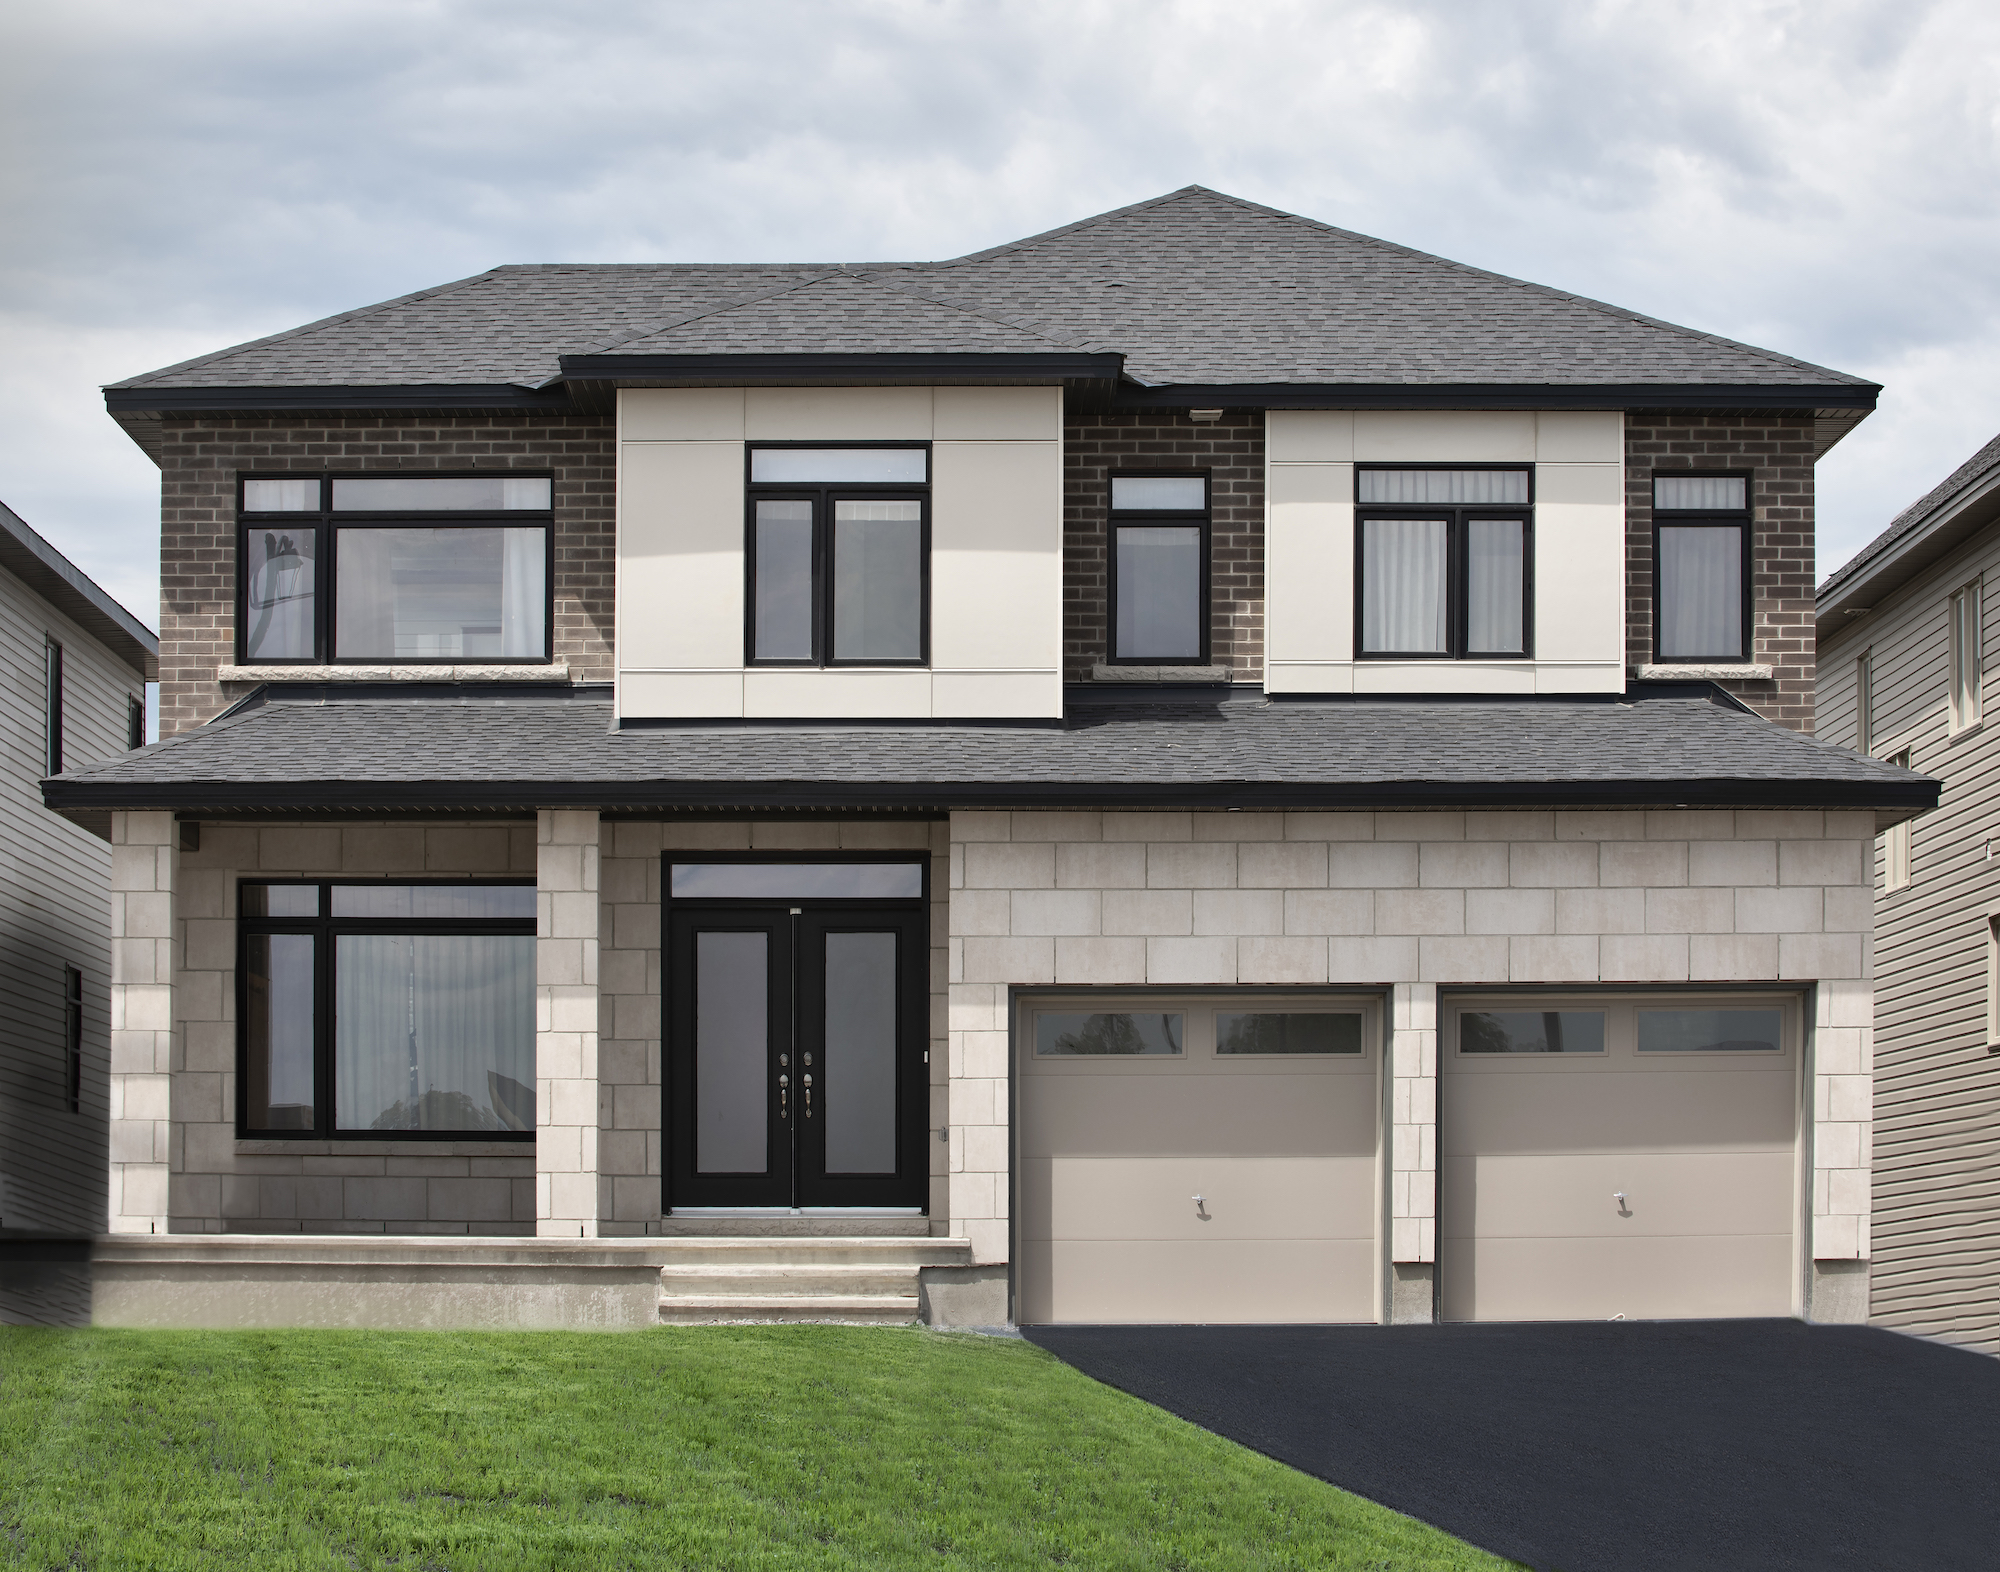 Key Factors to Consider when Hiring Home Builders in Ottawa